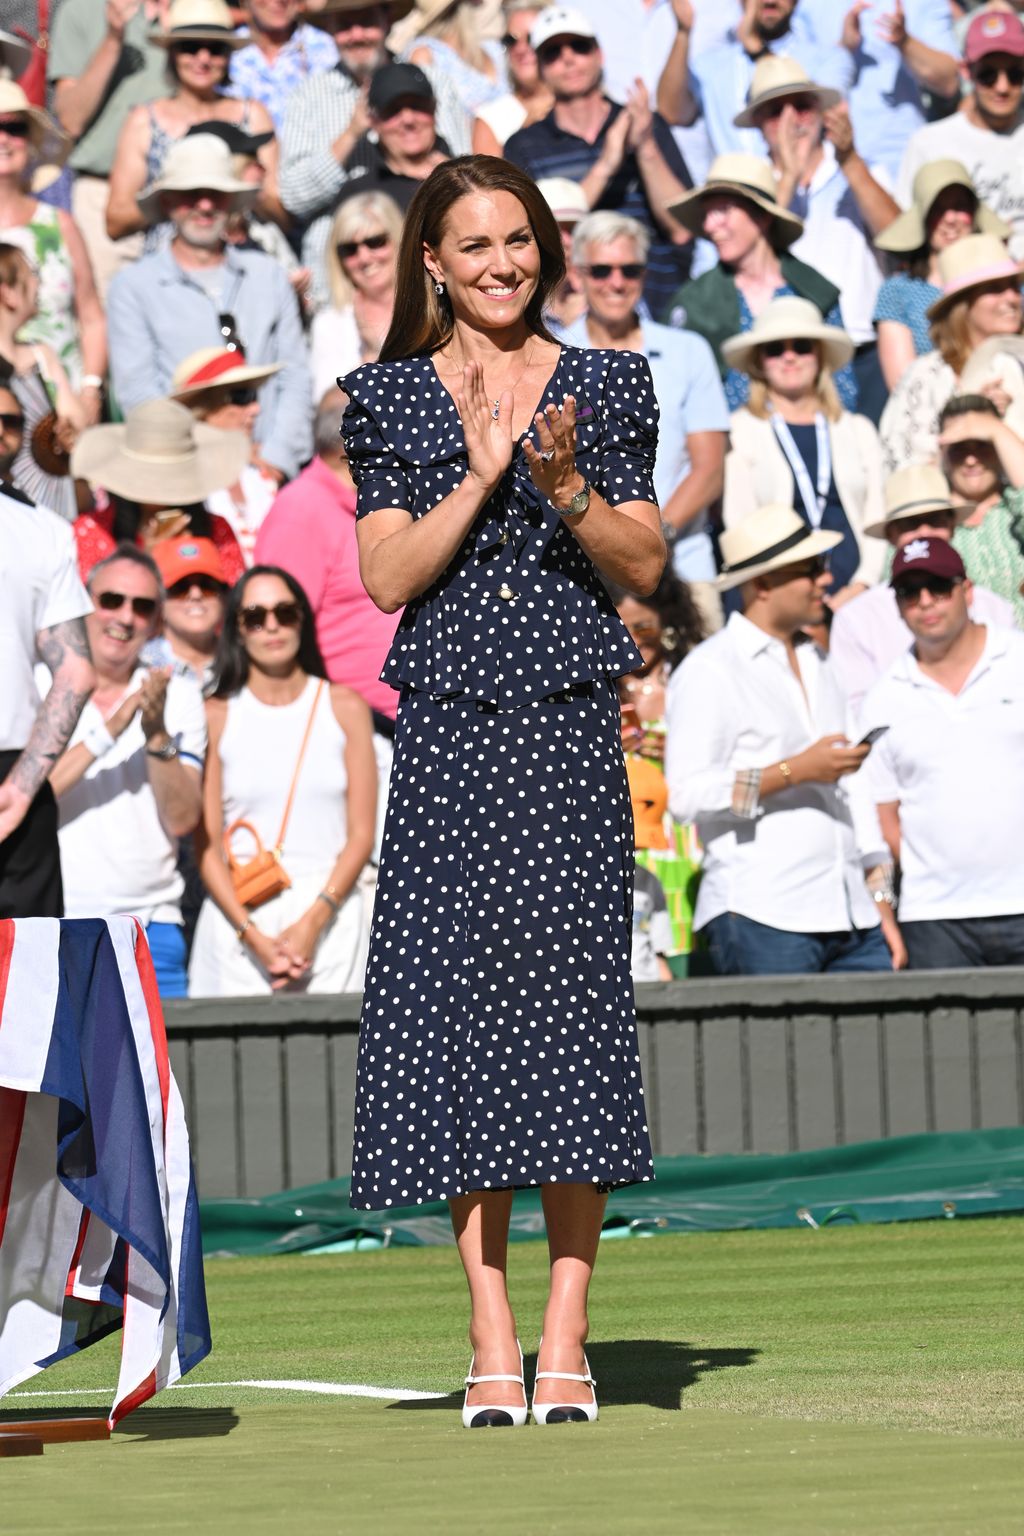 LONDON, ENGLAND - JULY 10: Catherine, Duchess of Cambridge attends The Wimbledon Men's Singles Final at the All England Lawn Tennis and Croquet Club on July 10, 2022 in London, England. (Photo by Karwai Tang/WireImage)